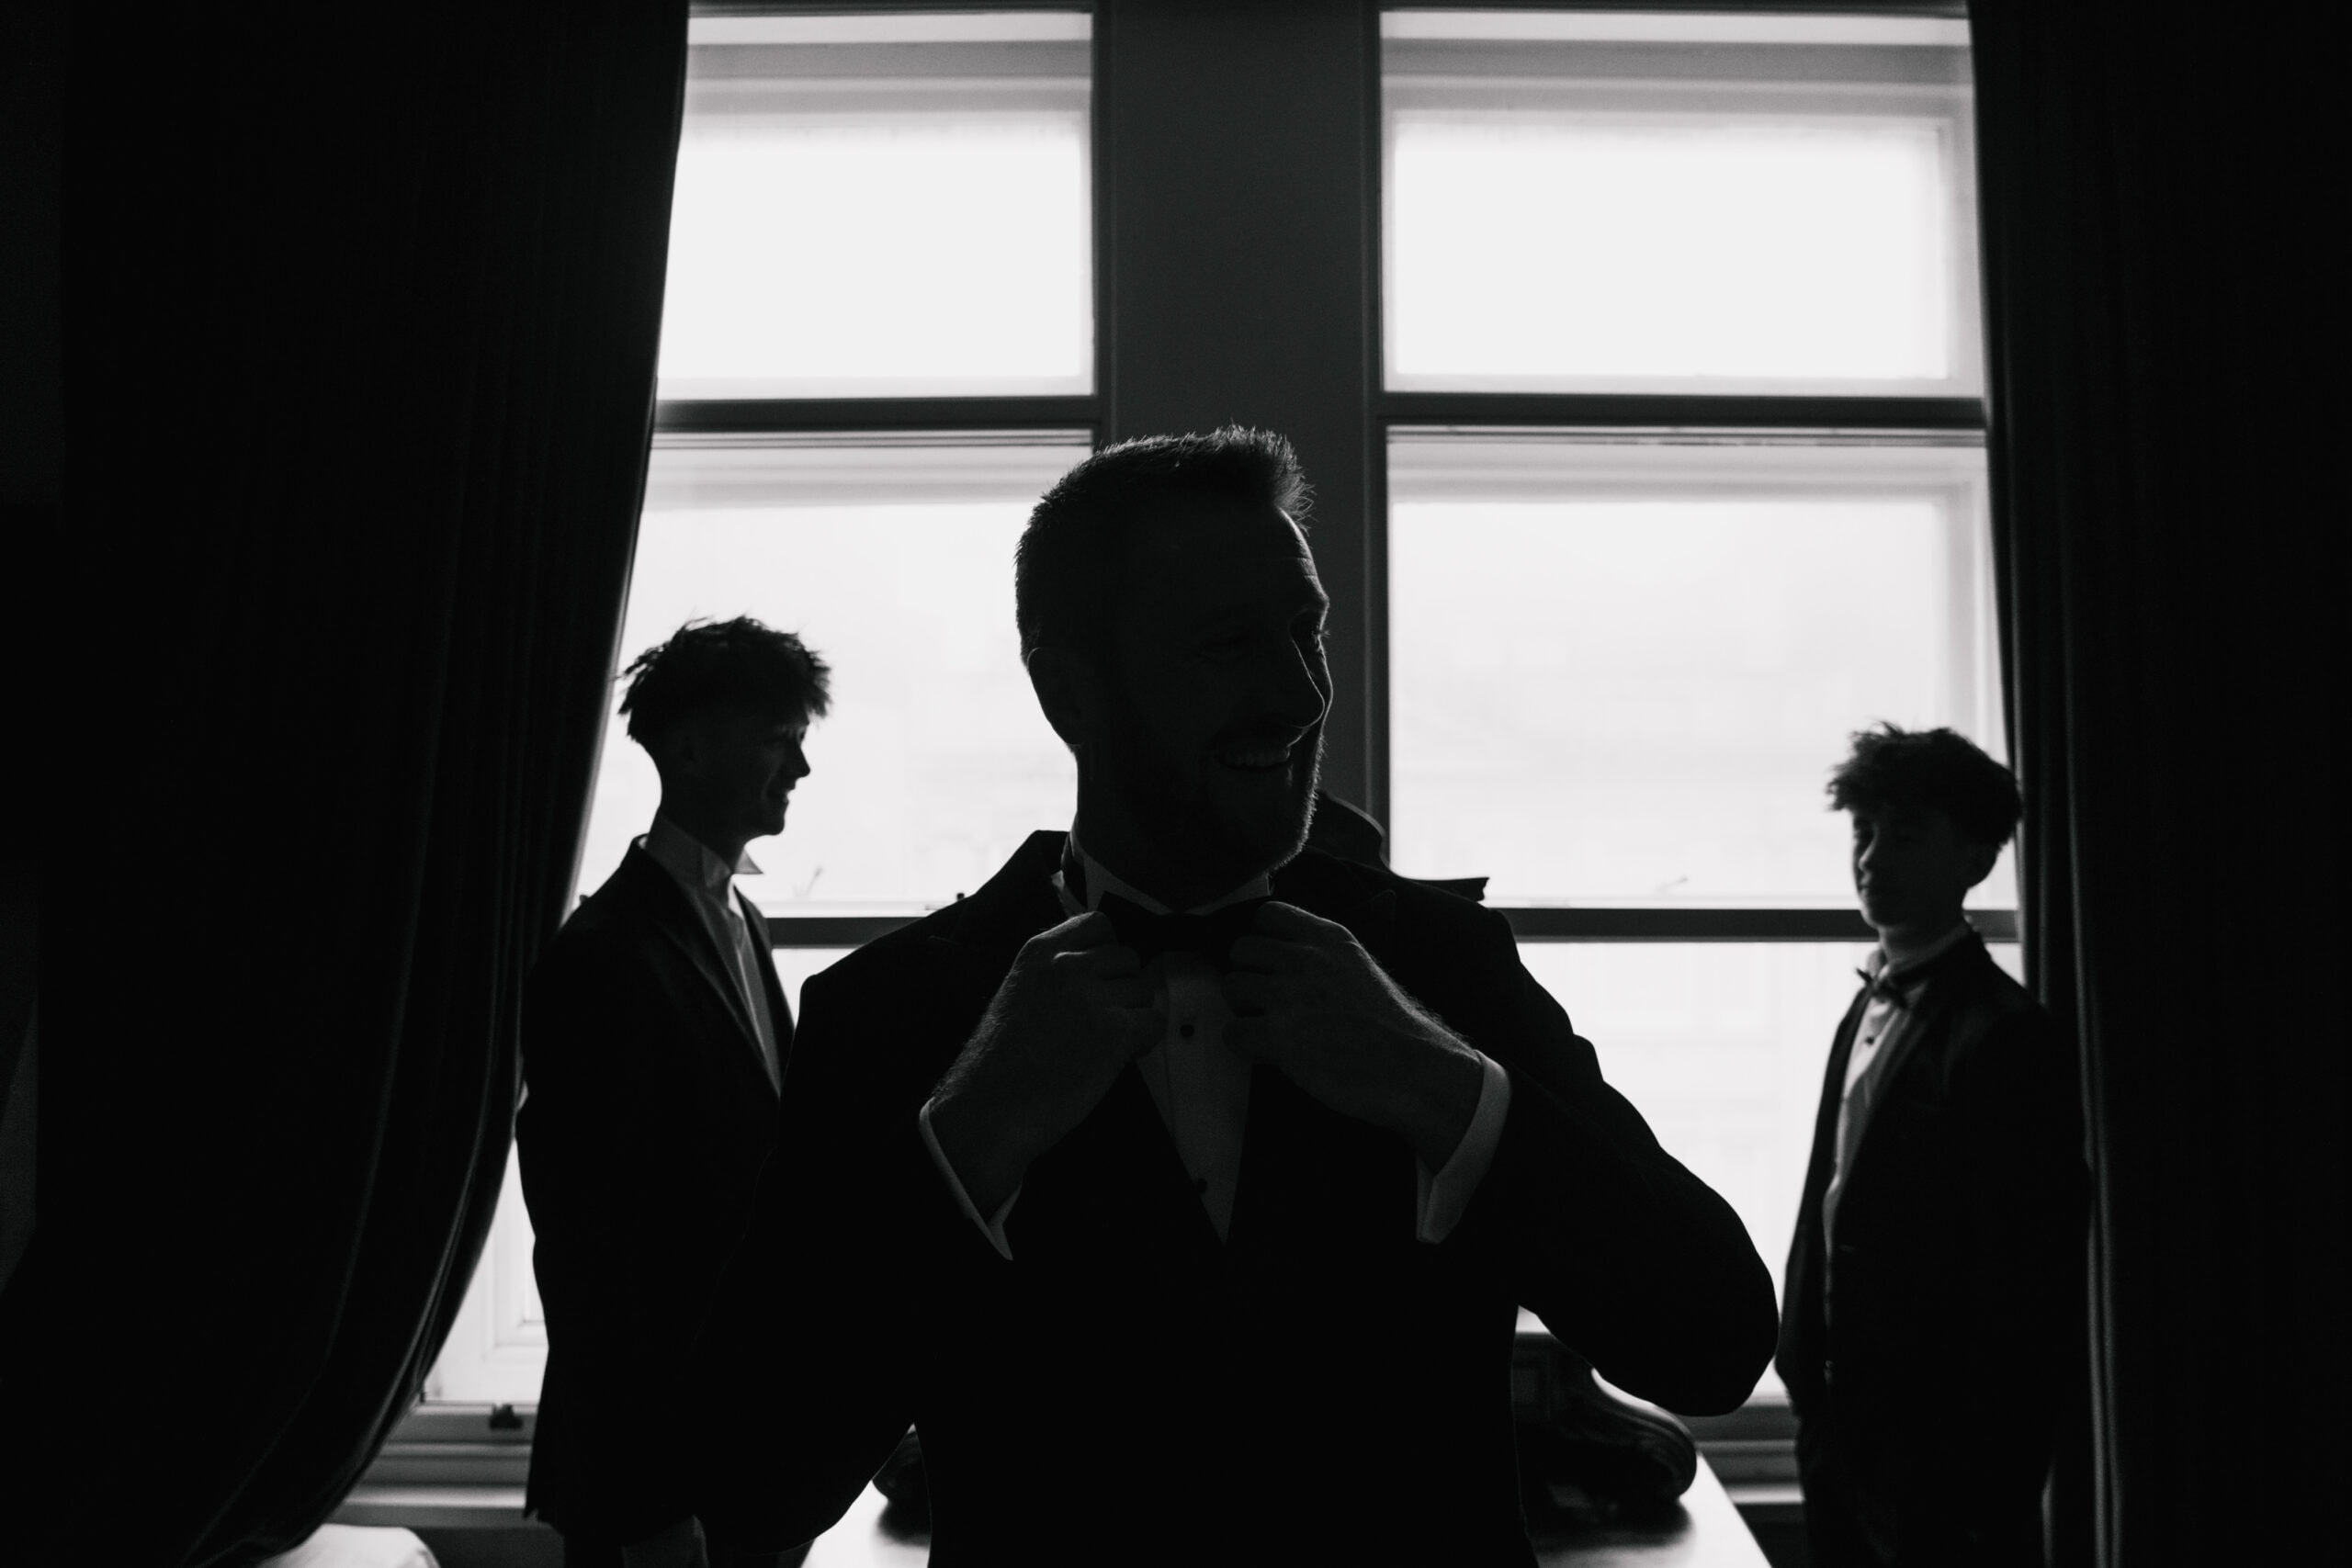 A man in a suit adjusts his bow tie, silhouetted against a bright window, with two other men in the background. The mood is formal and elegant, typical of a South Wales wedding